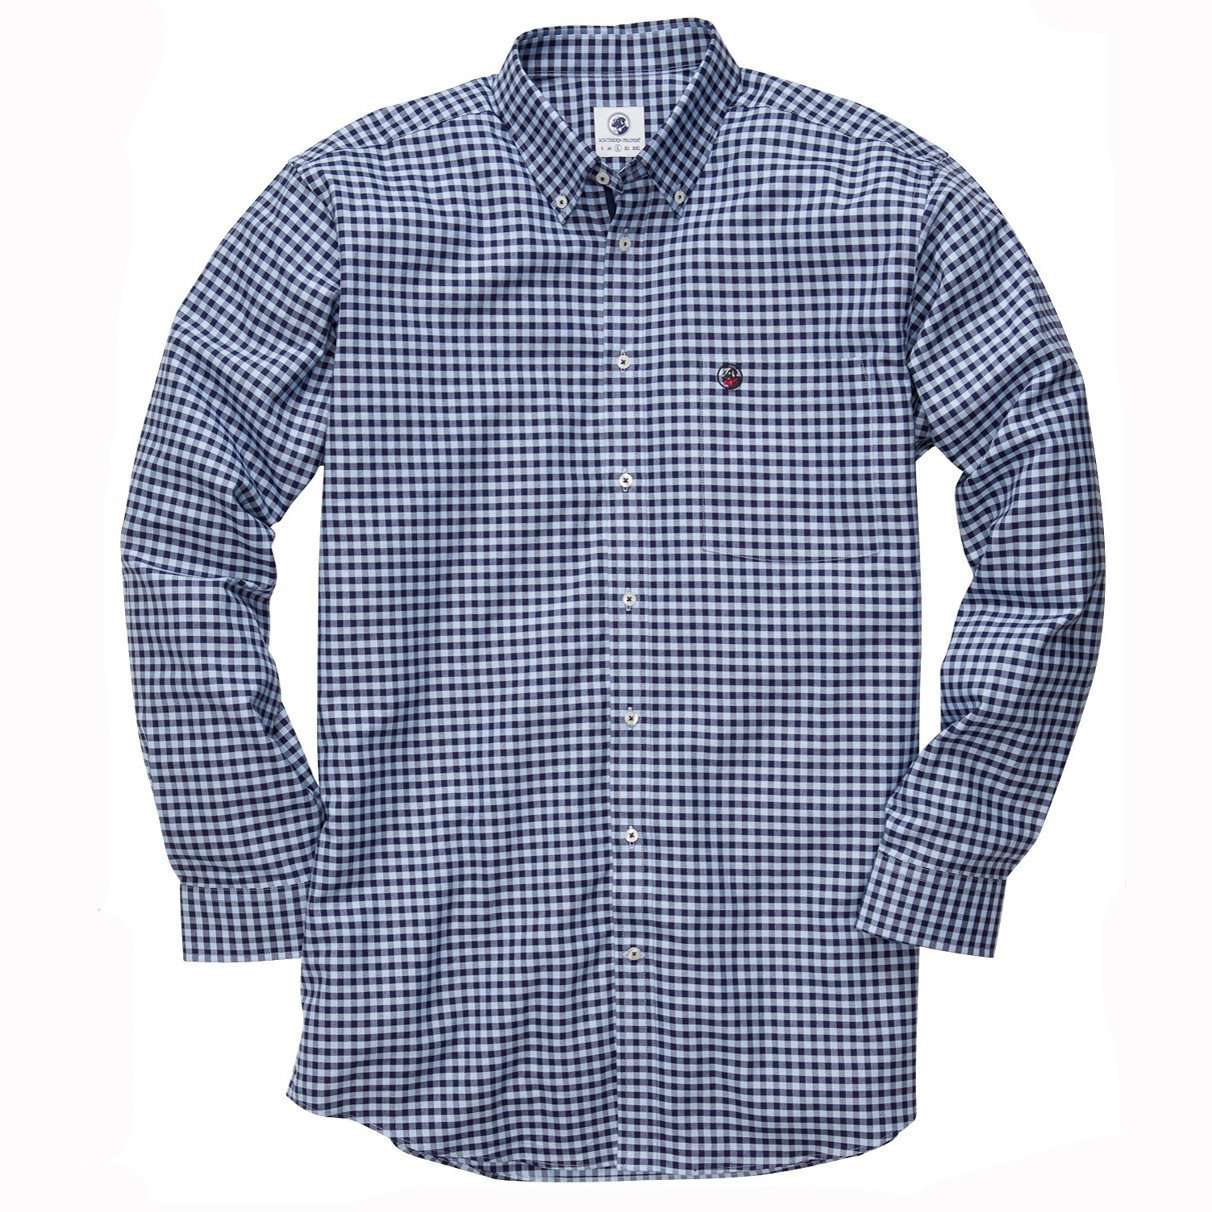 The Navy Check Southern Shirt by Southern Proper - Country Club Prep